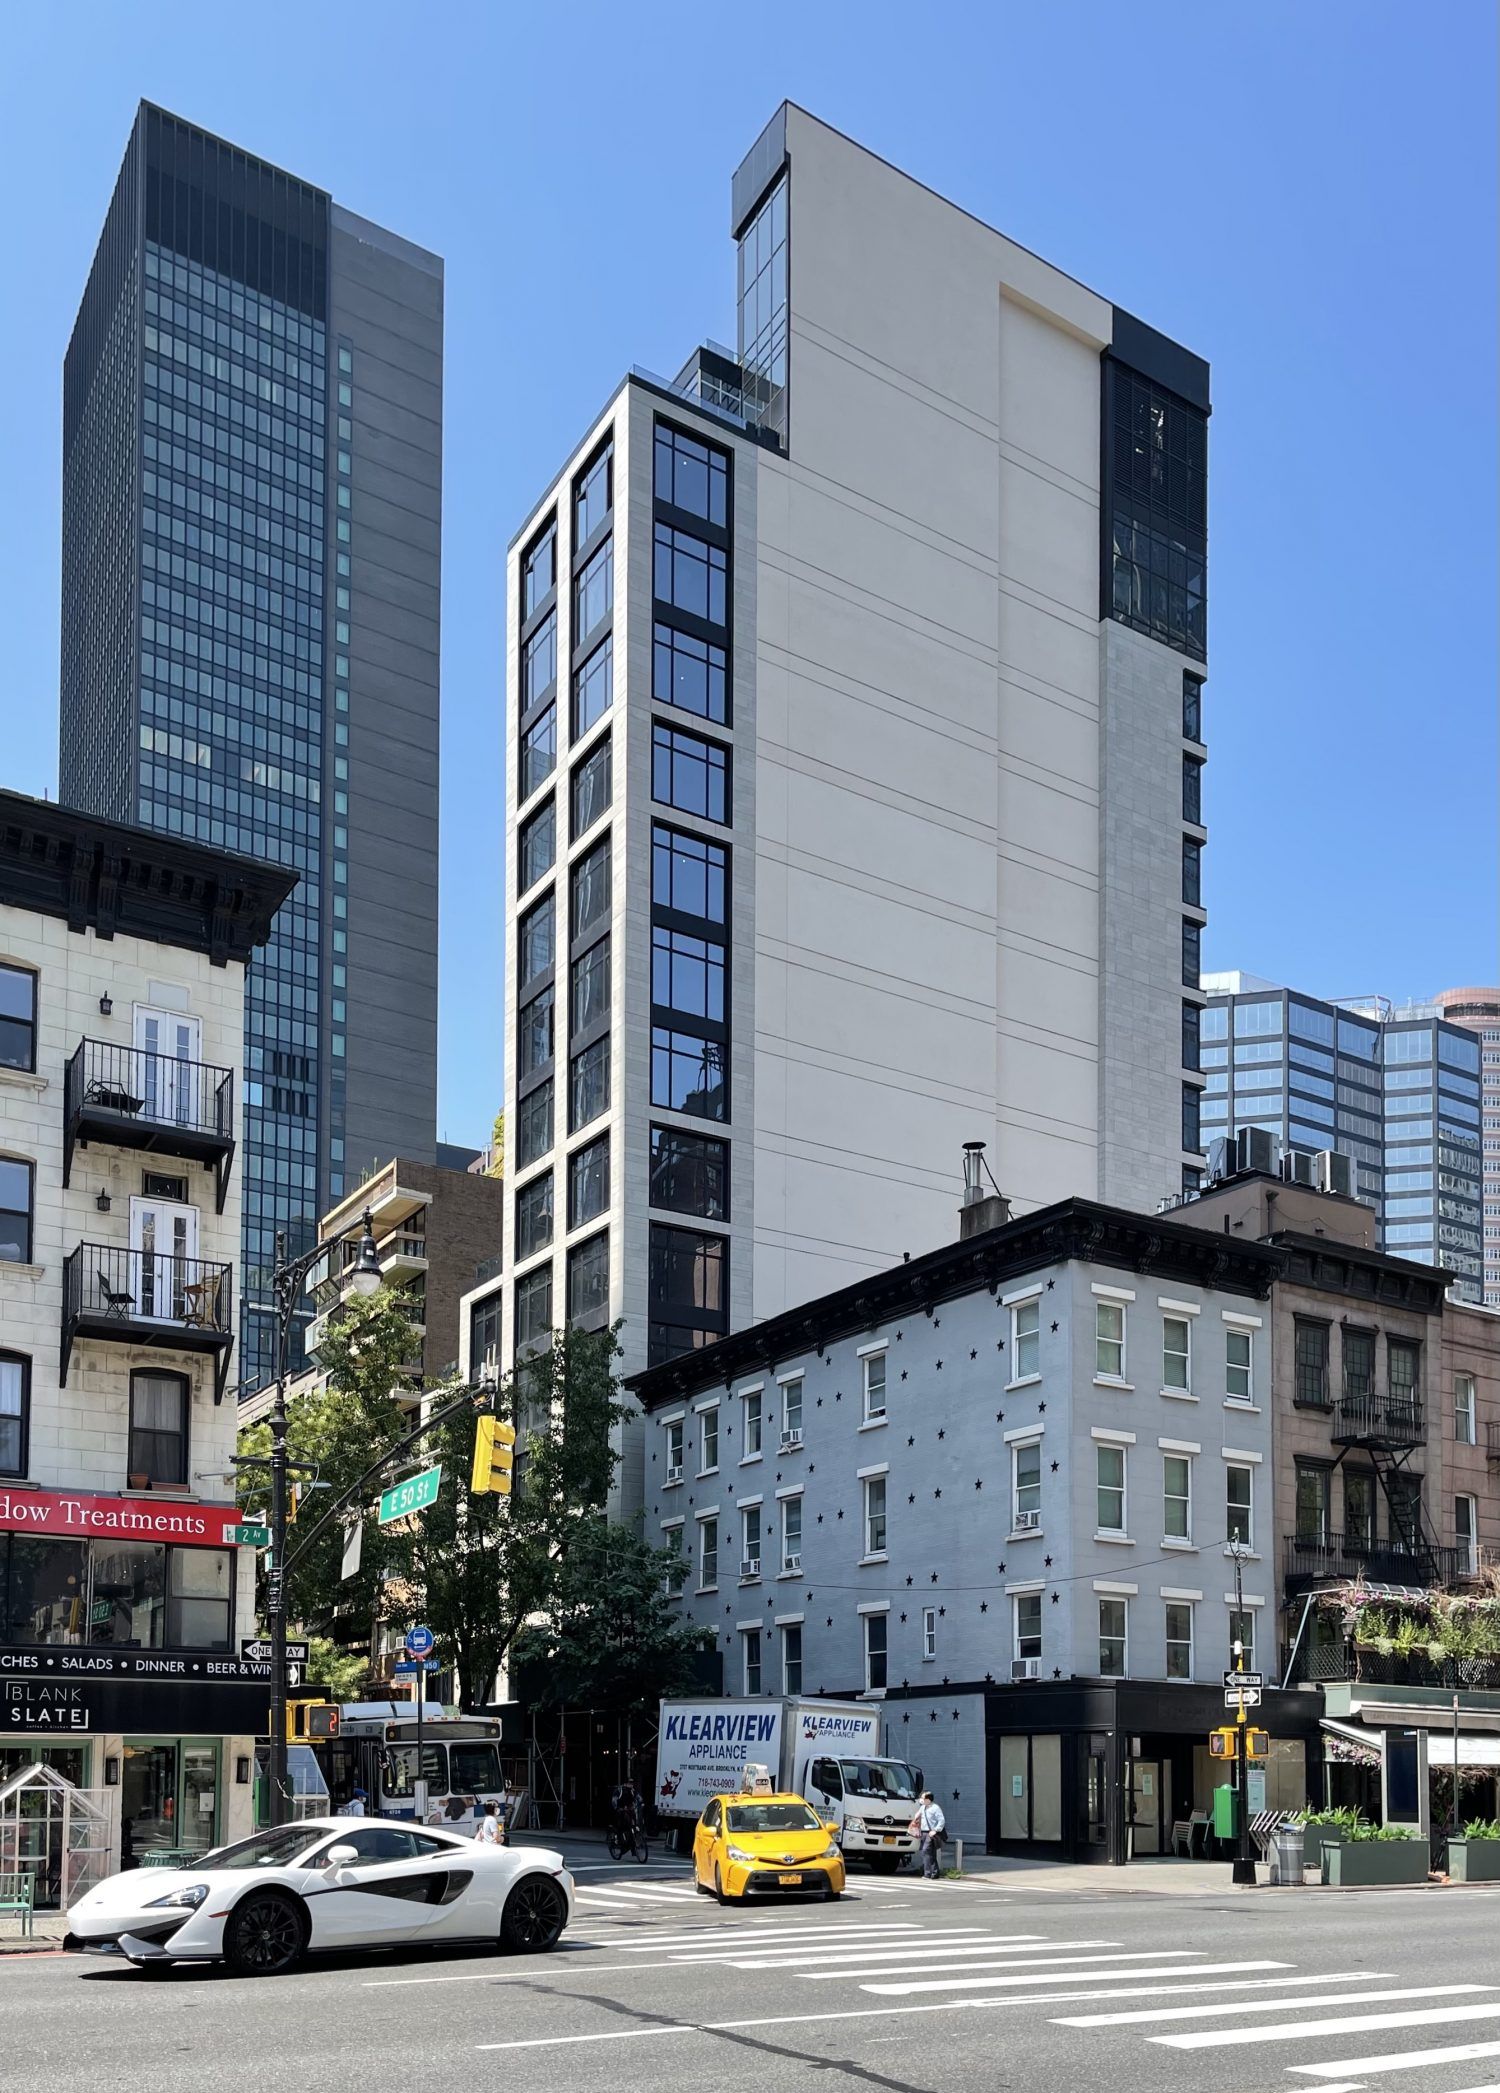 249 East 50th Street Nears Completion